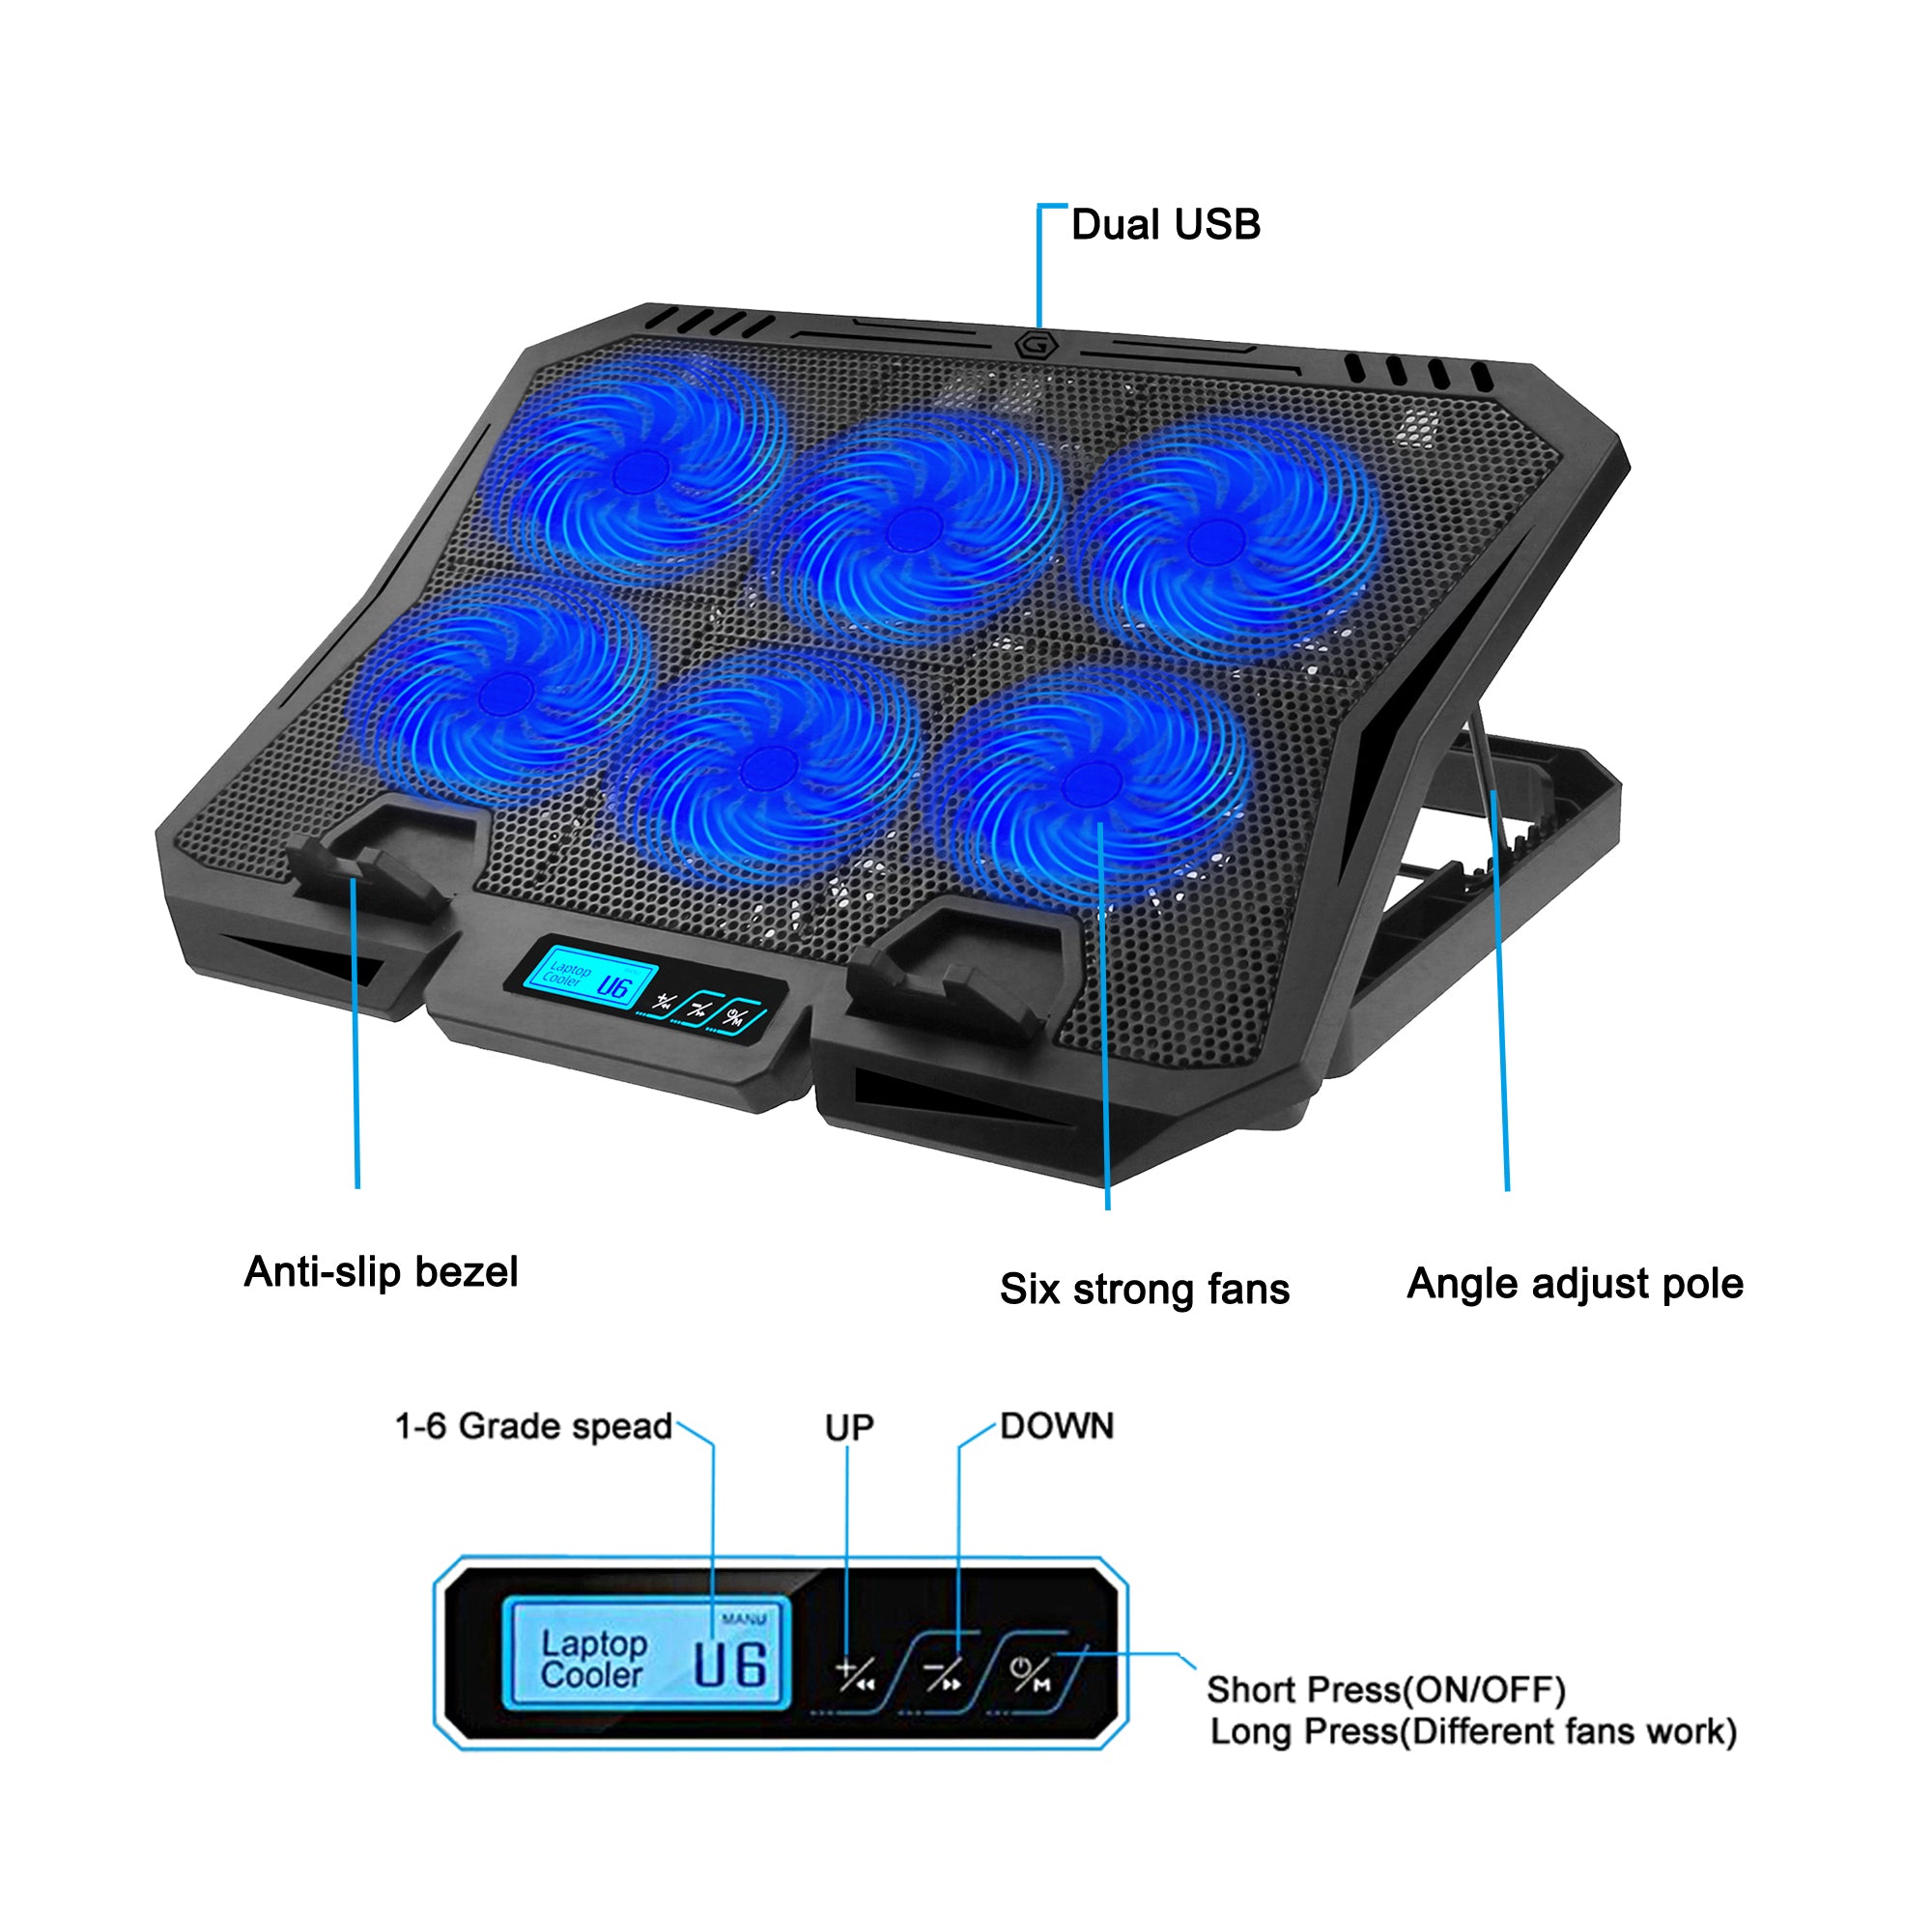 X6A 7-Gear Height Laptop Cooling Pad 6-Fan Radiator Notebook Cooler Stand with Display Screen - Blue Light